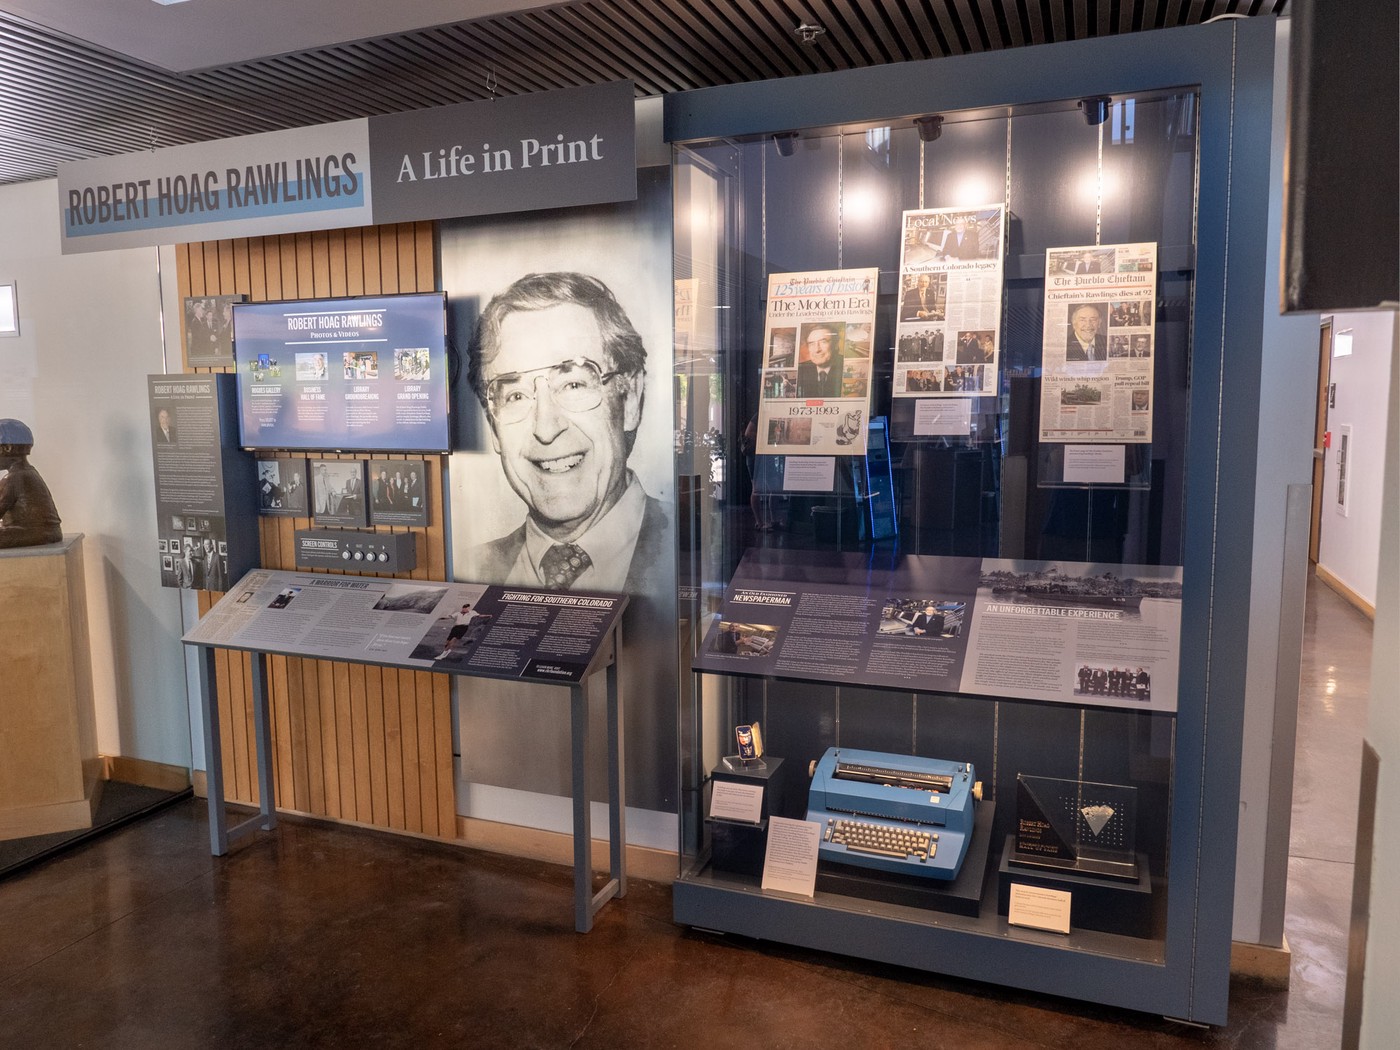 exhibit filling a wall featuring steely blue colors; photo and interpretive panels, screen, large metalic portrait, display case